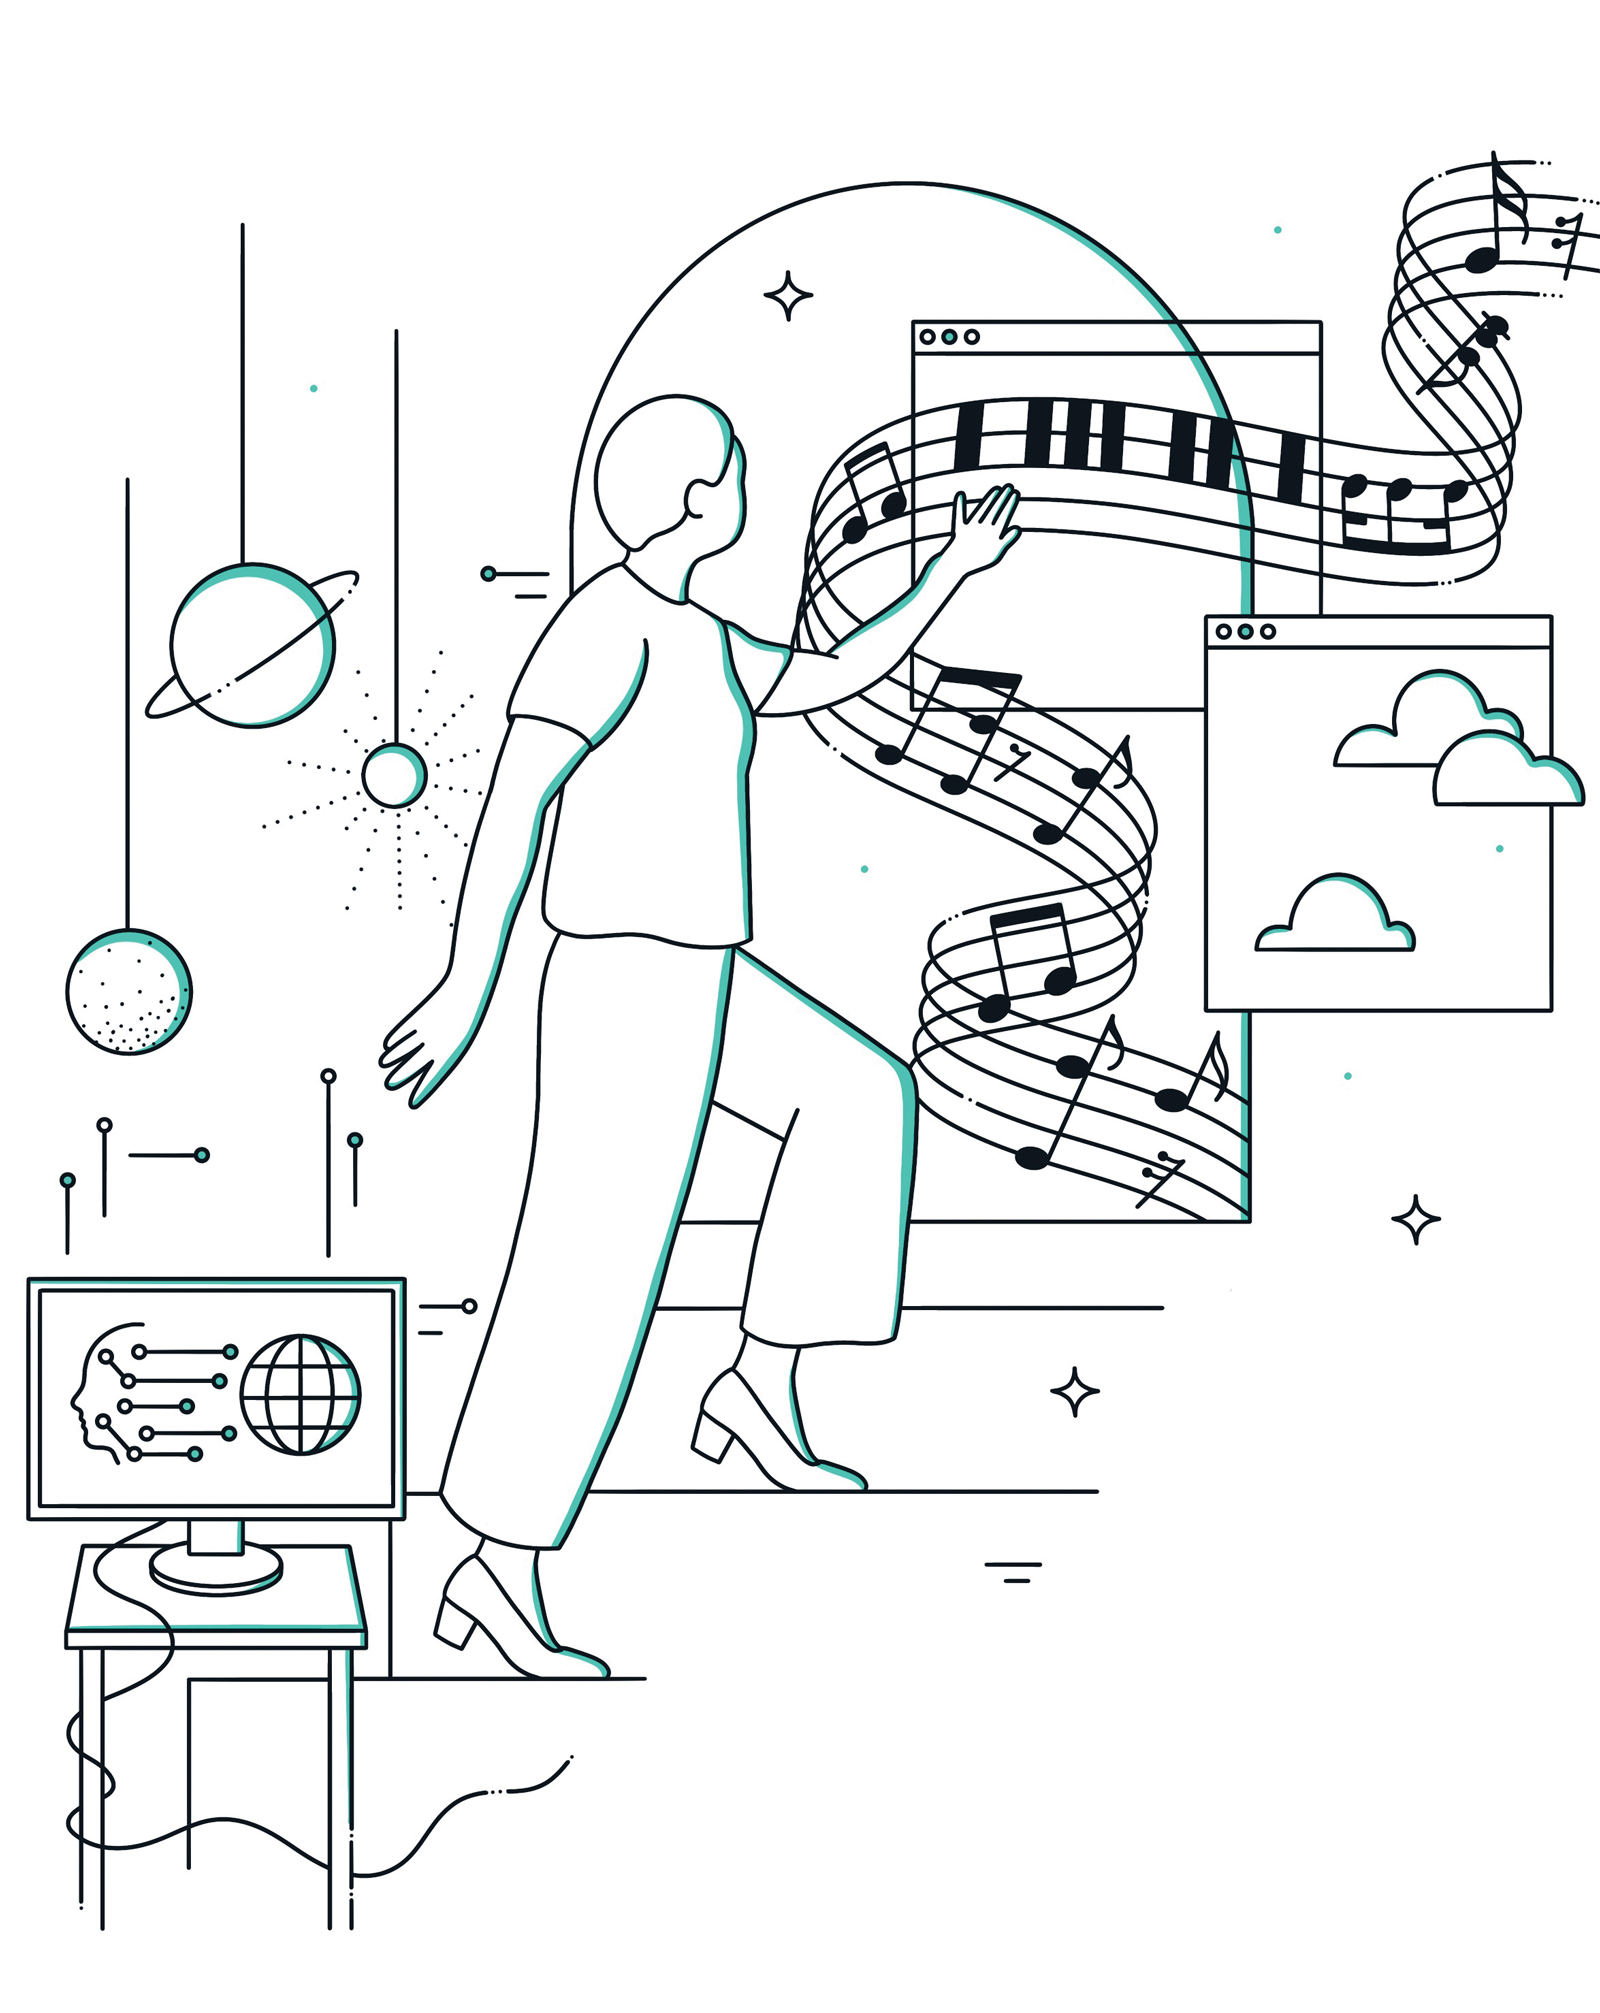 Sketch of a person ascending up steps and reaching out to musical notes